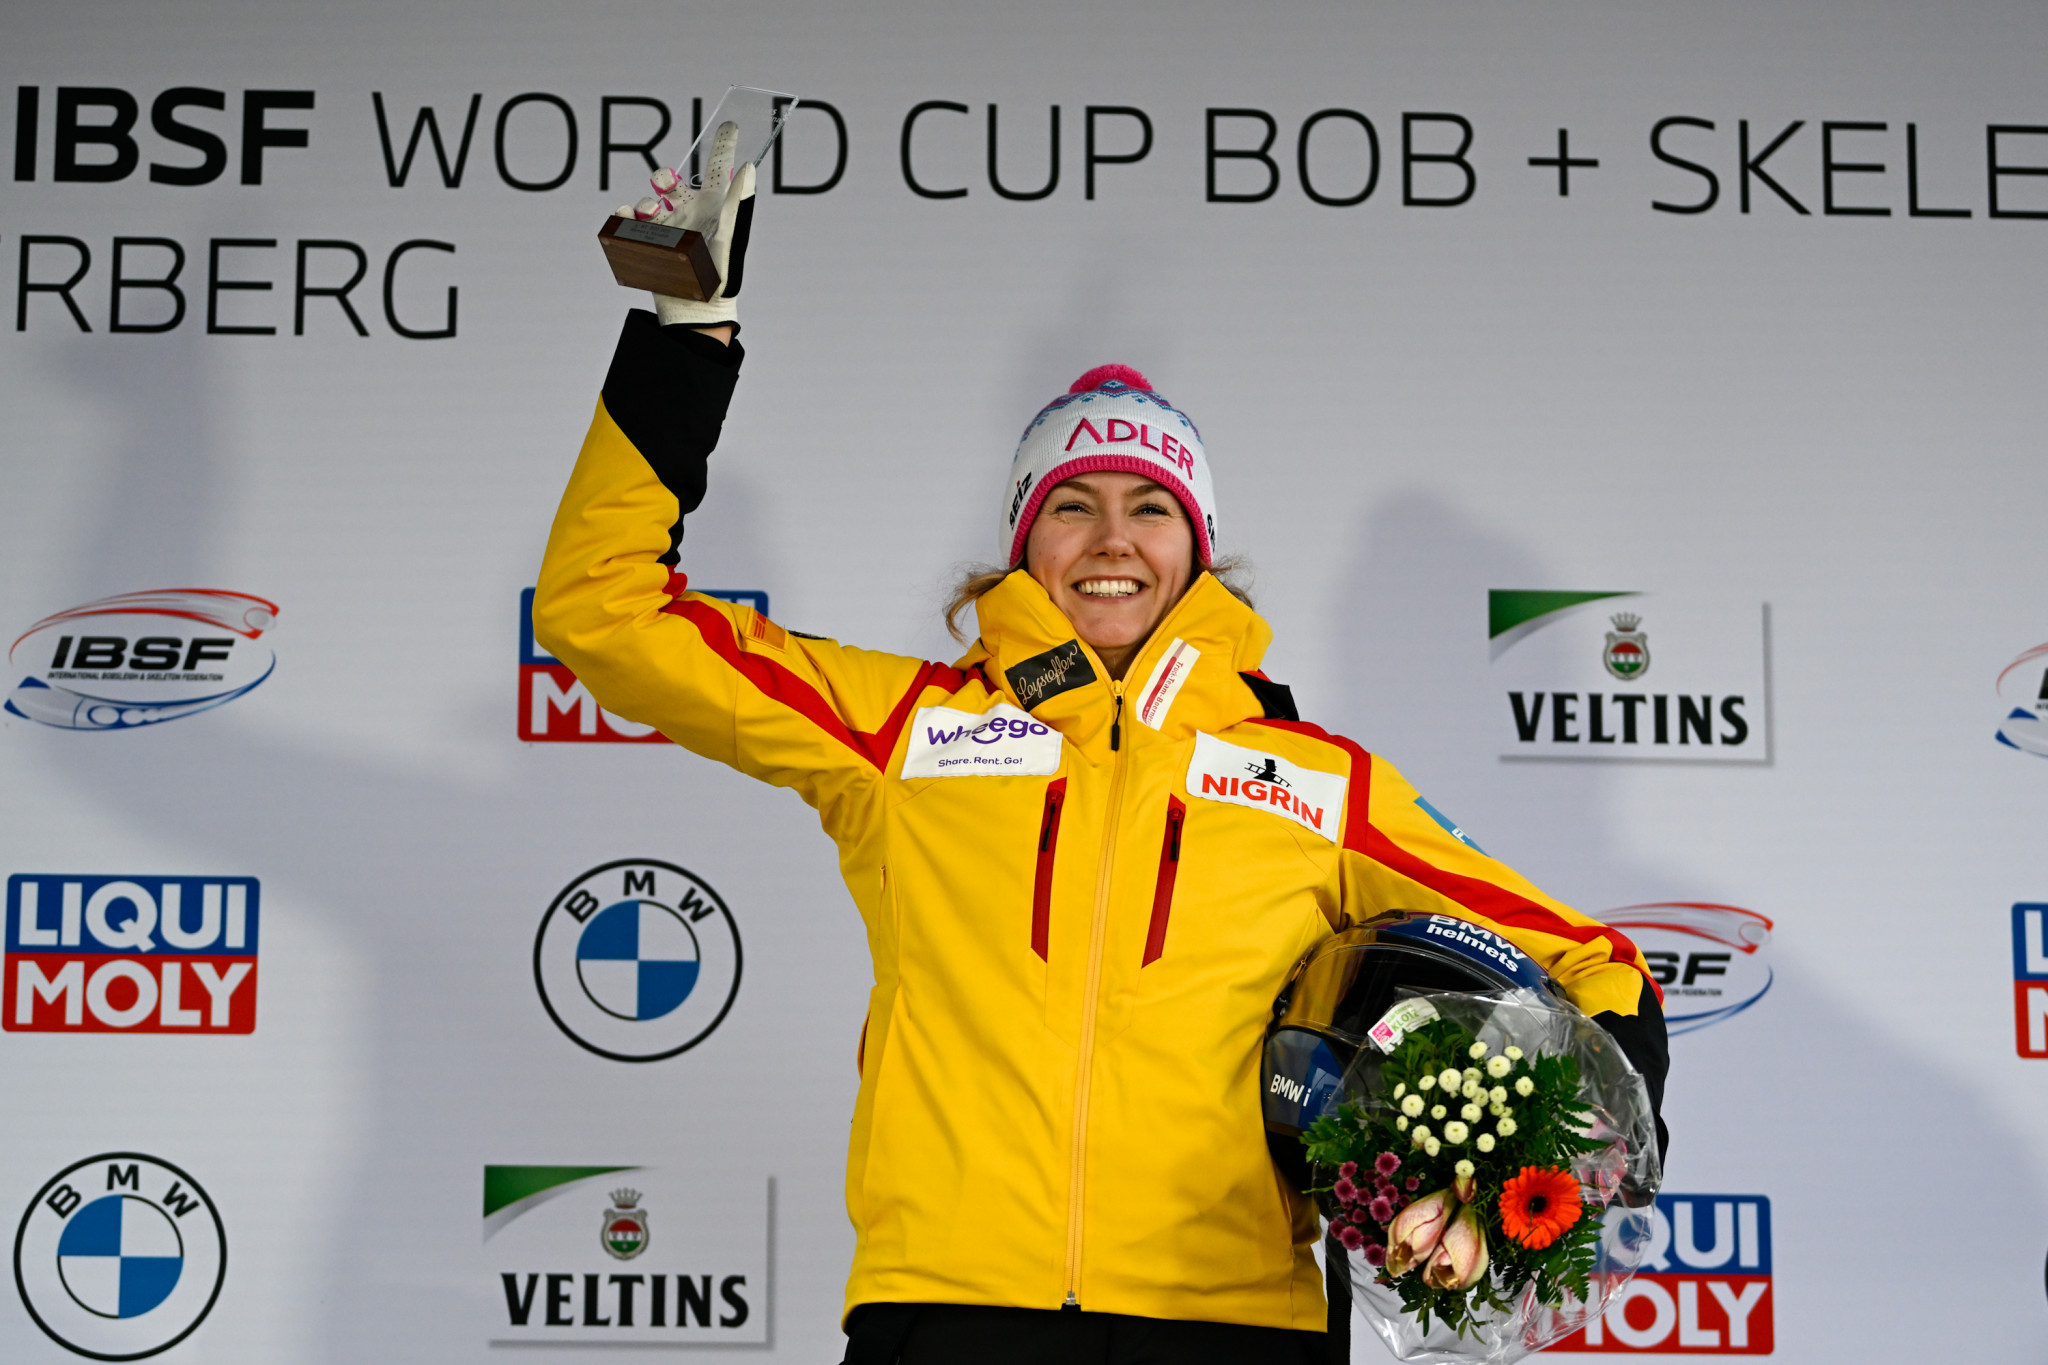 Laura Nolte of Germany claimed the monobob title at the IBSF World Cup in Winterberg ©IBSF